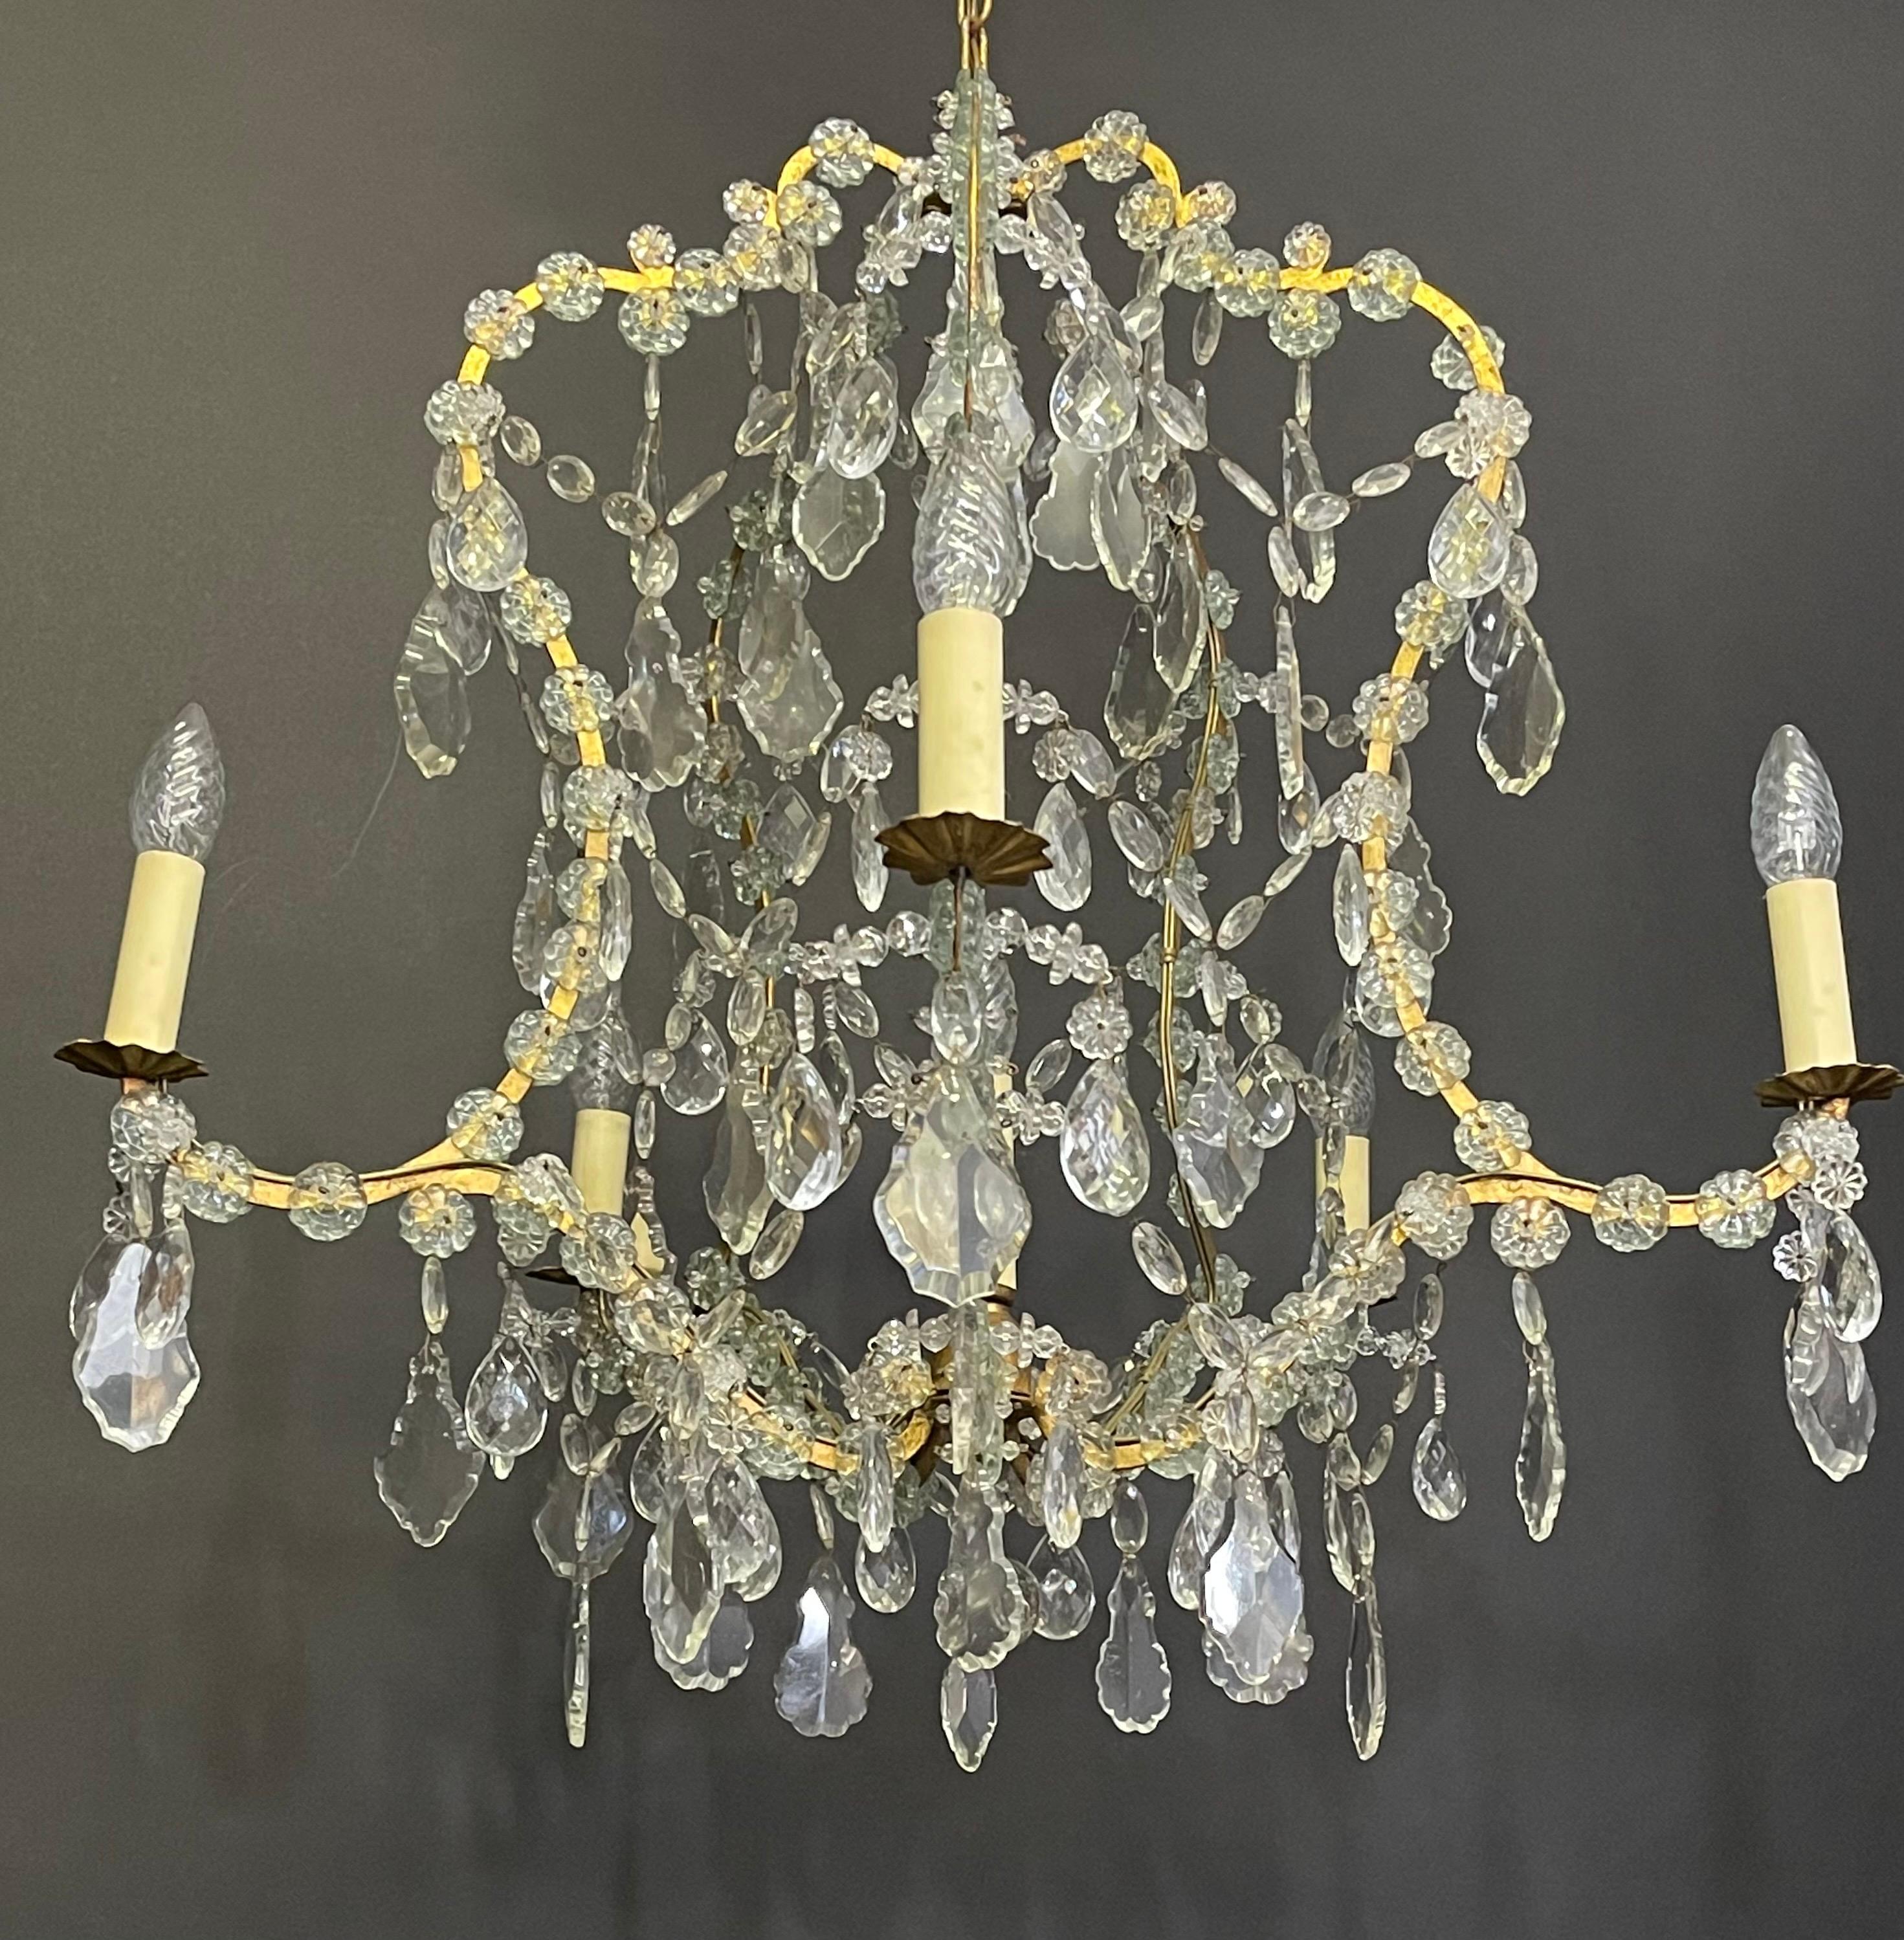 A wonderful, large Pagoda glass and gilt iron chandelier, Austria, circa 1950s.
Measurements: Height - 27.55 inches (without chain and canopy) totally height 48.03 inches.
 Diameter - 27.55 inches.
Socket: for six ( e14) candelabra bulbs or for US